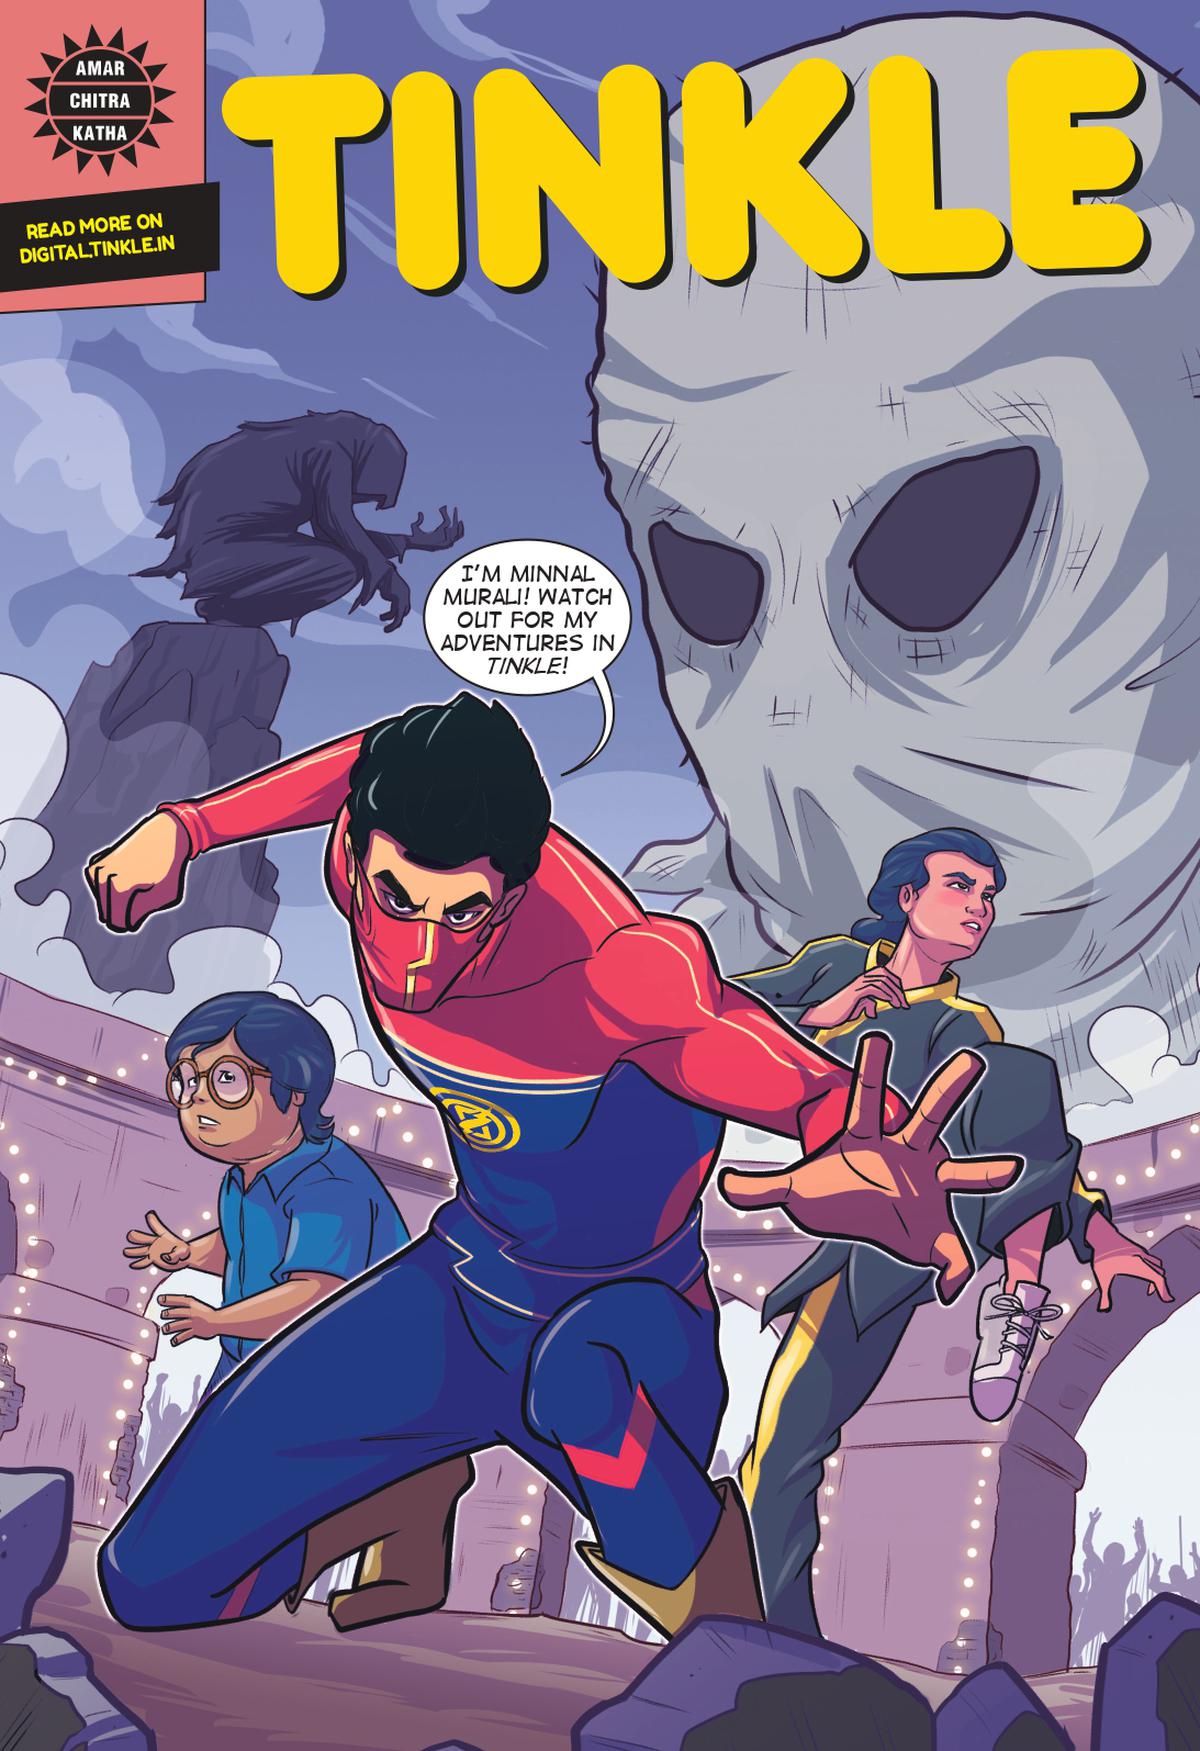 Minnal Murali as a character in Tinkle, will be unveiled at San Diego Comic-Con 2023